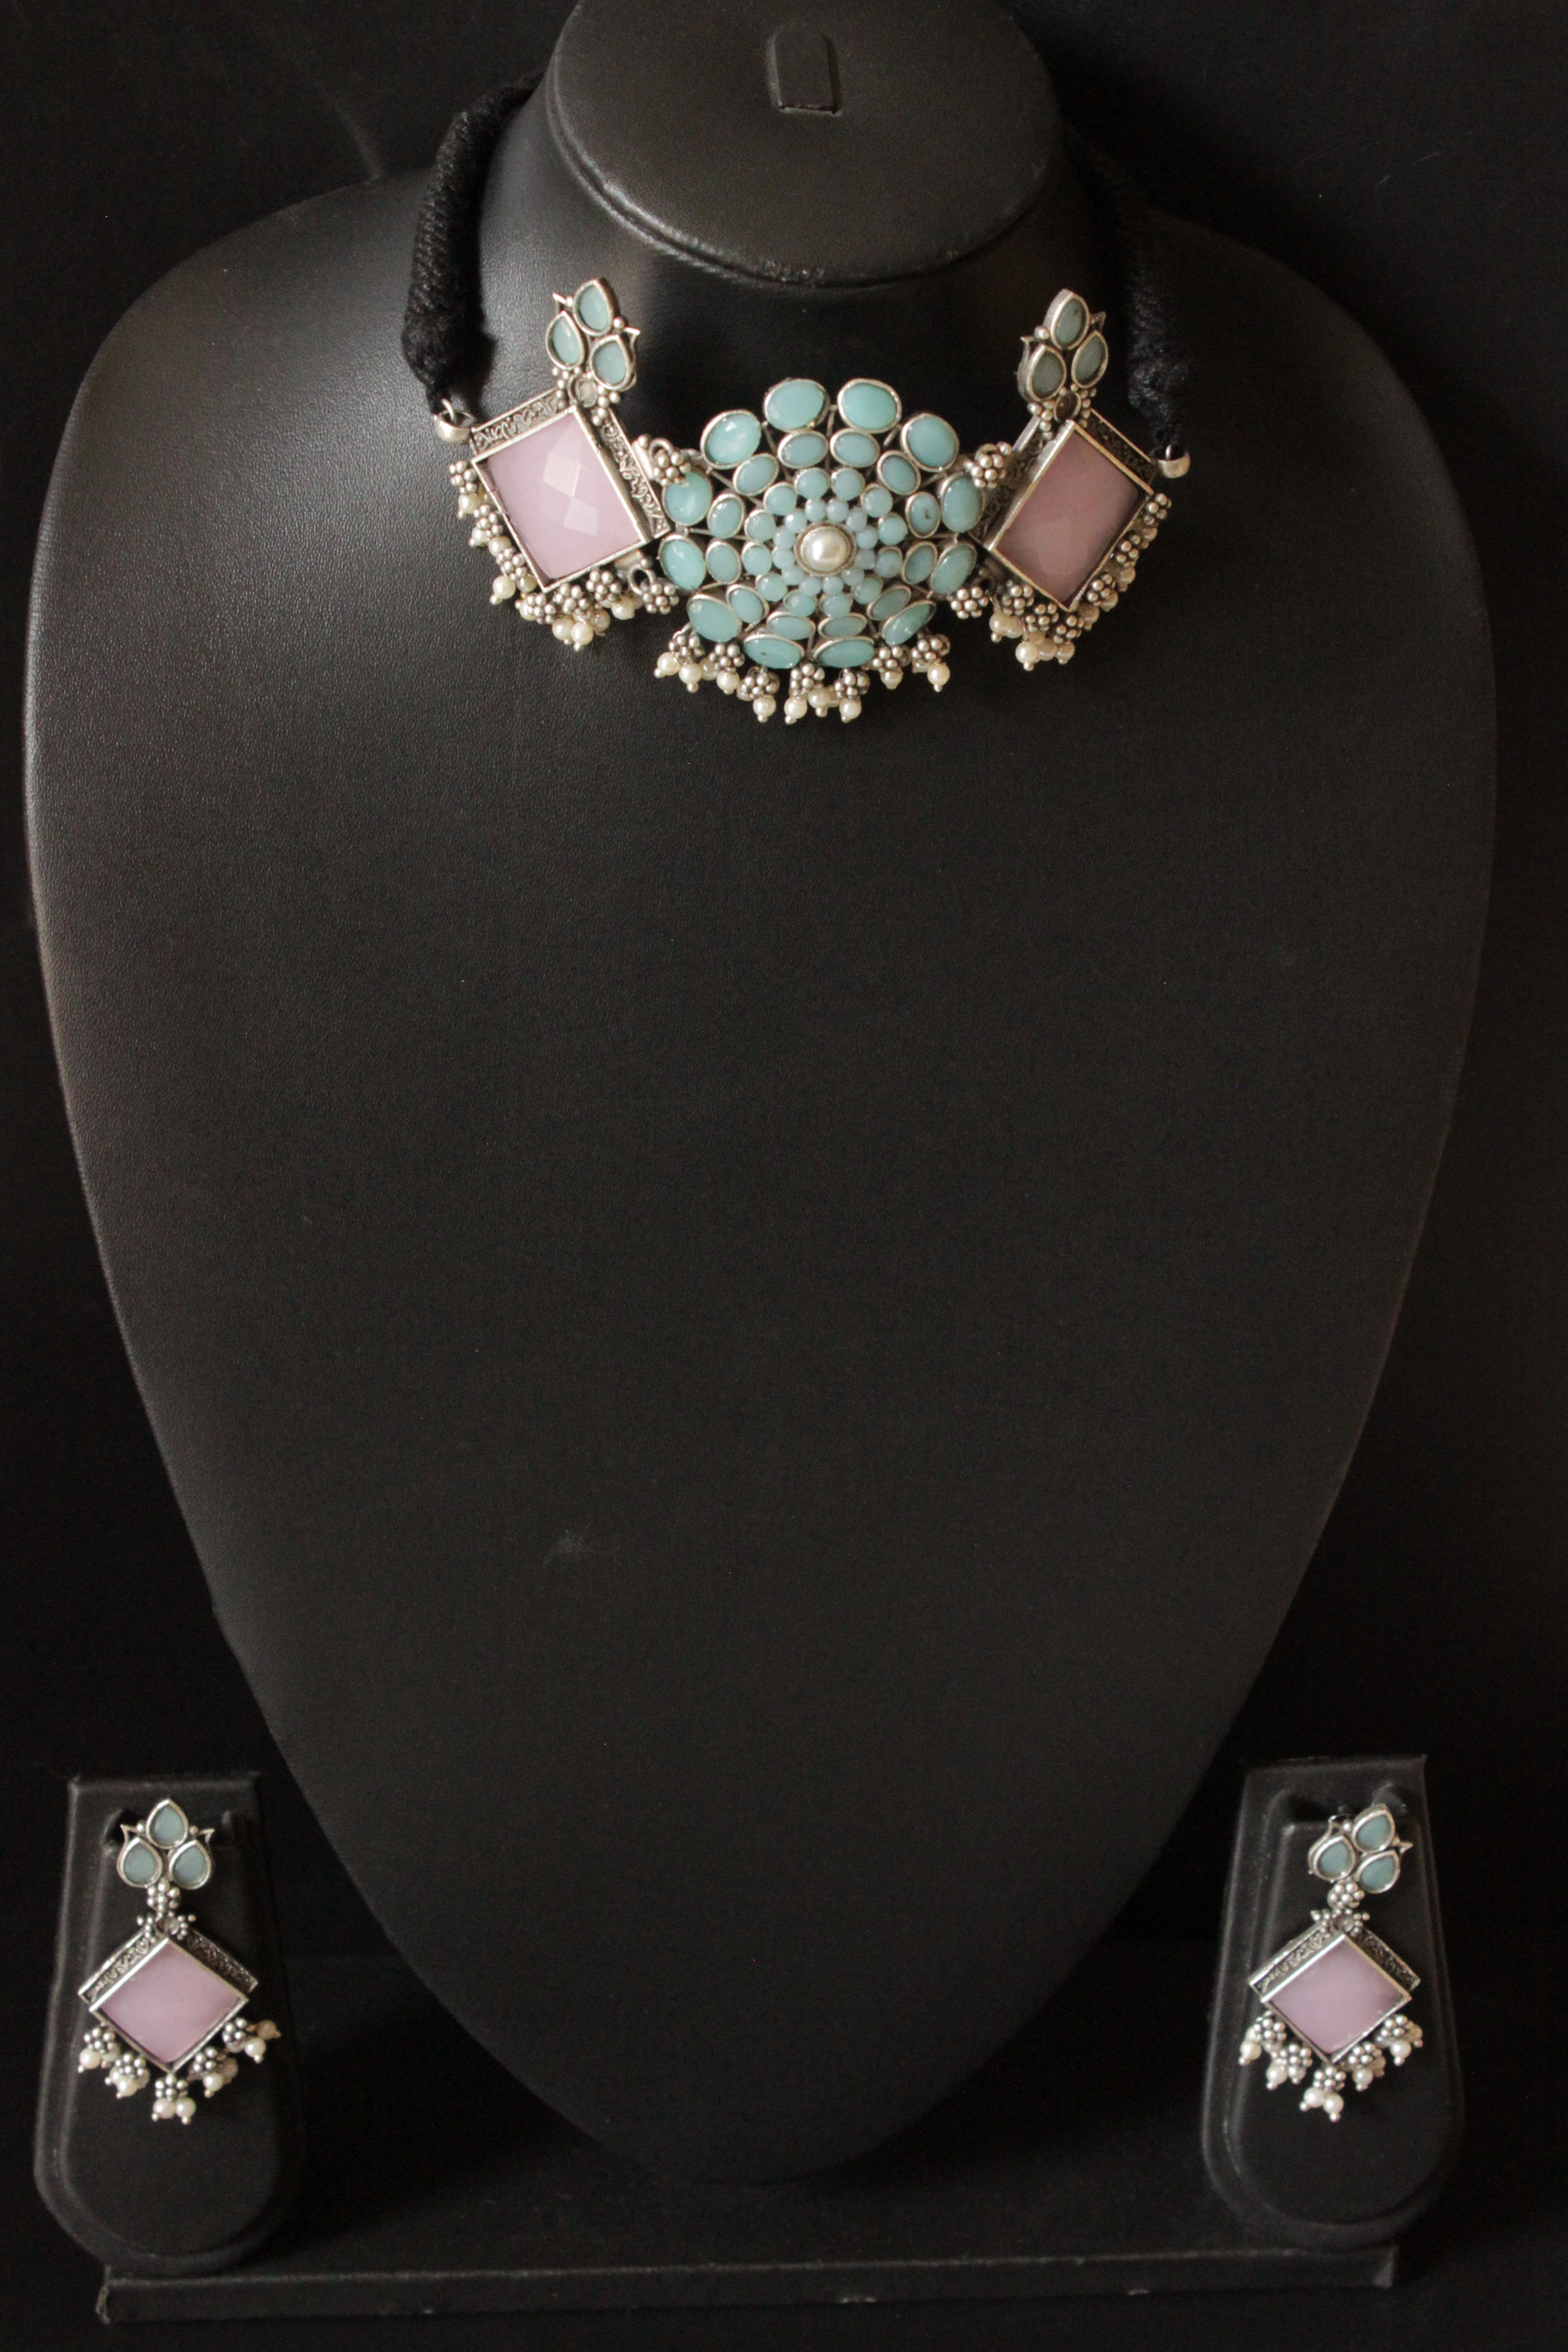 Turquoise and Baby Pink Glass Stones Embedded Elaborate Choker Necklace Set with Adjustable Thread Closure